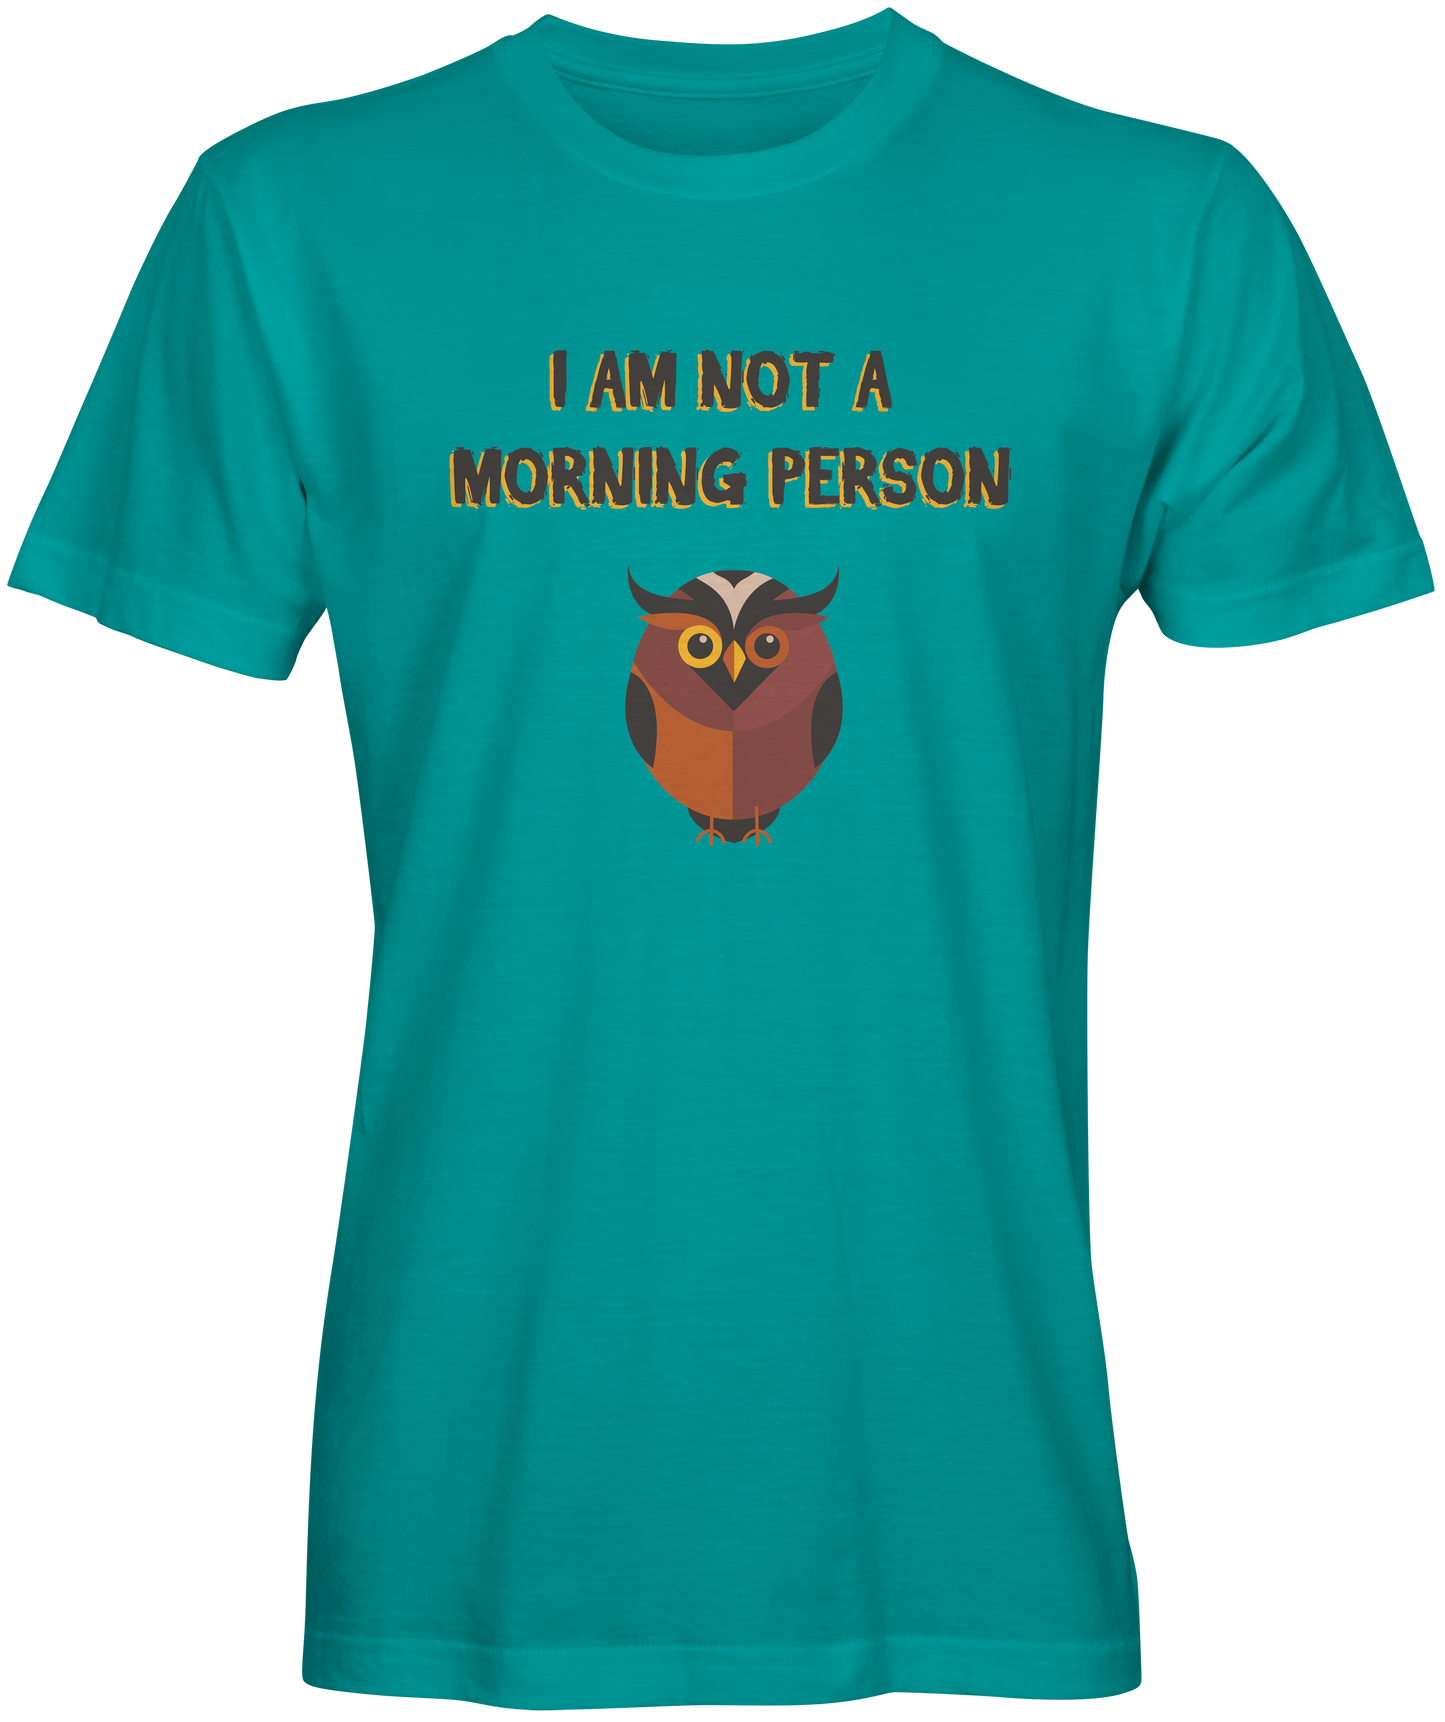 I'm Not A Morning Person Graphic Tee